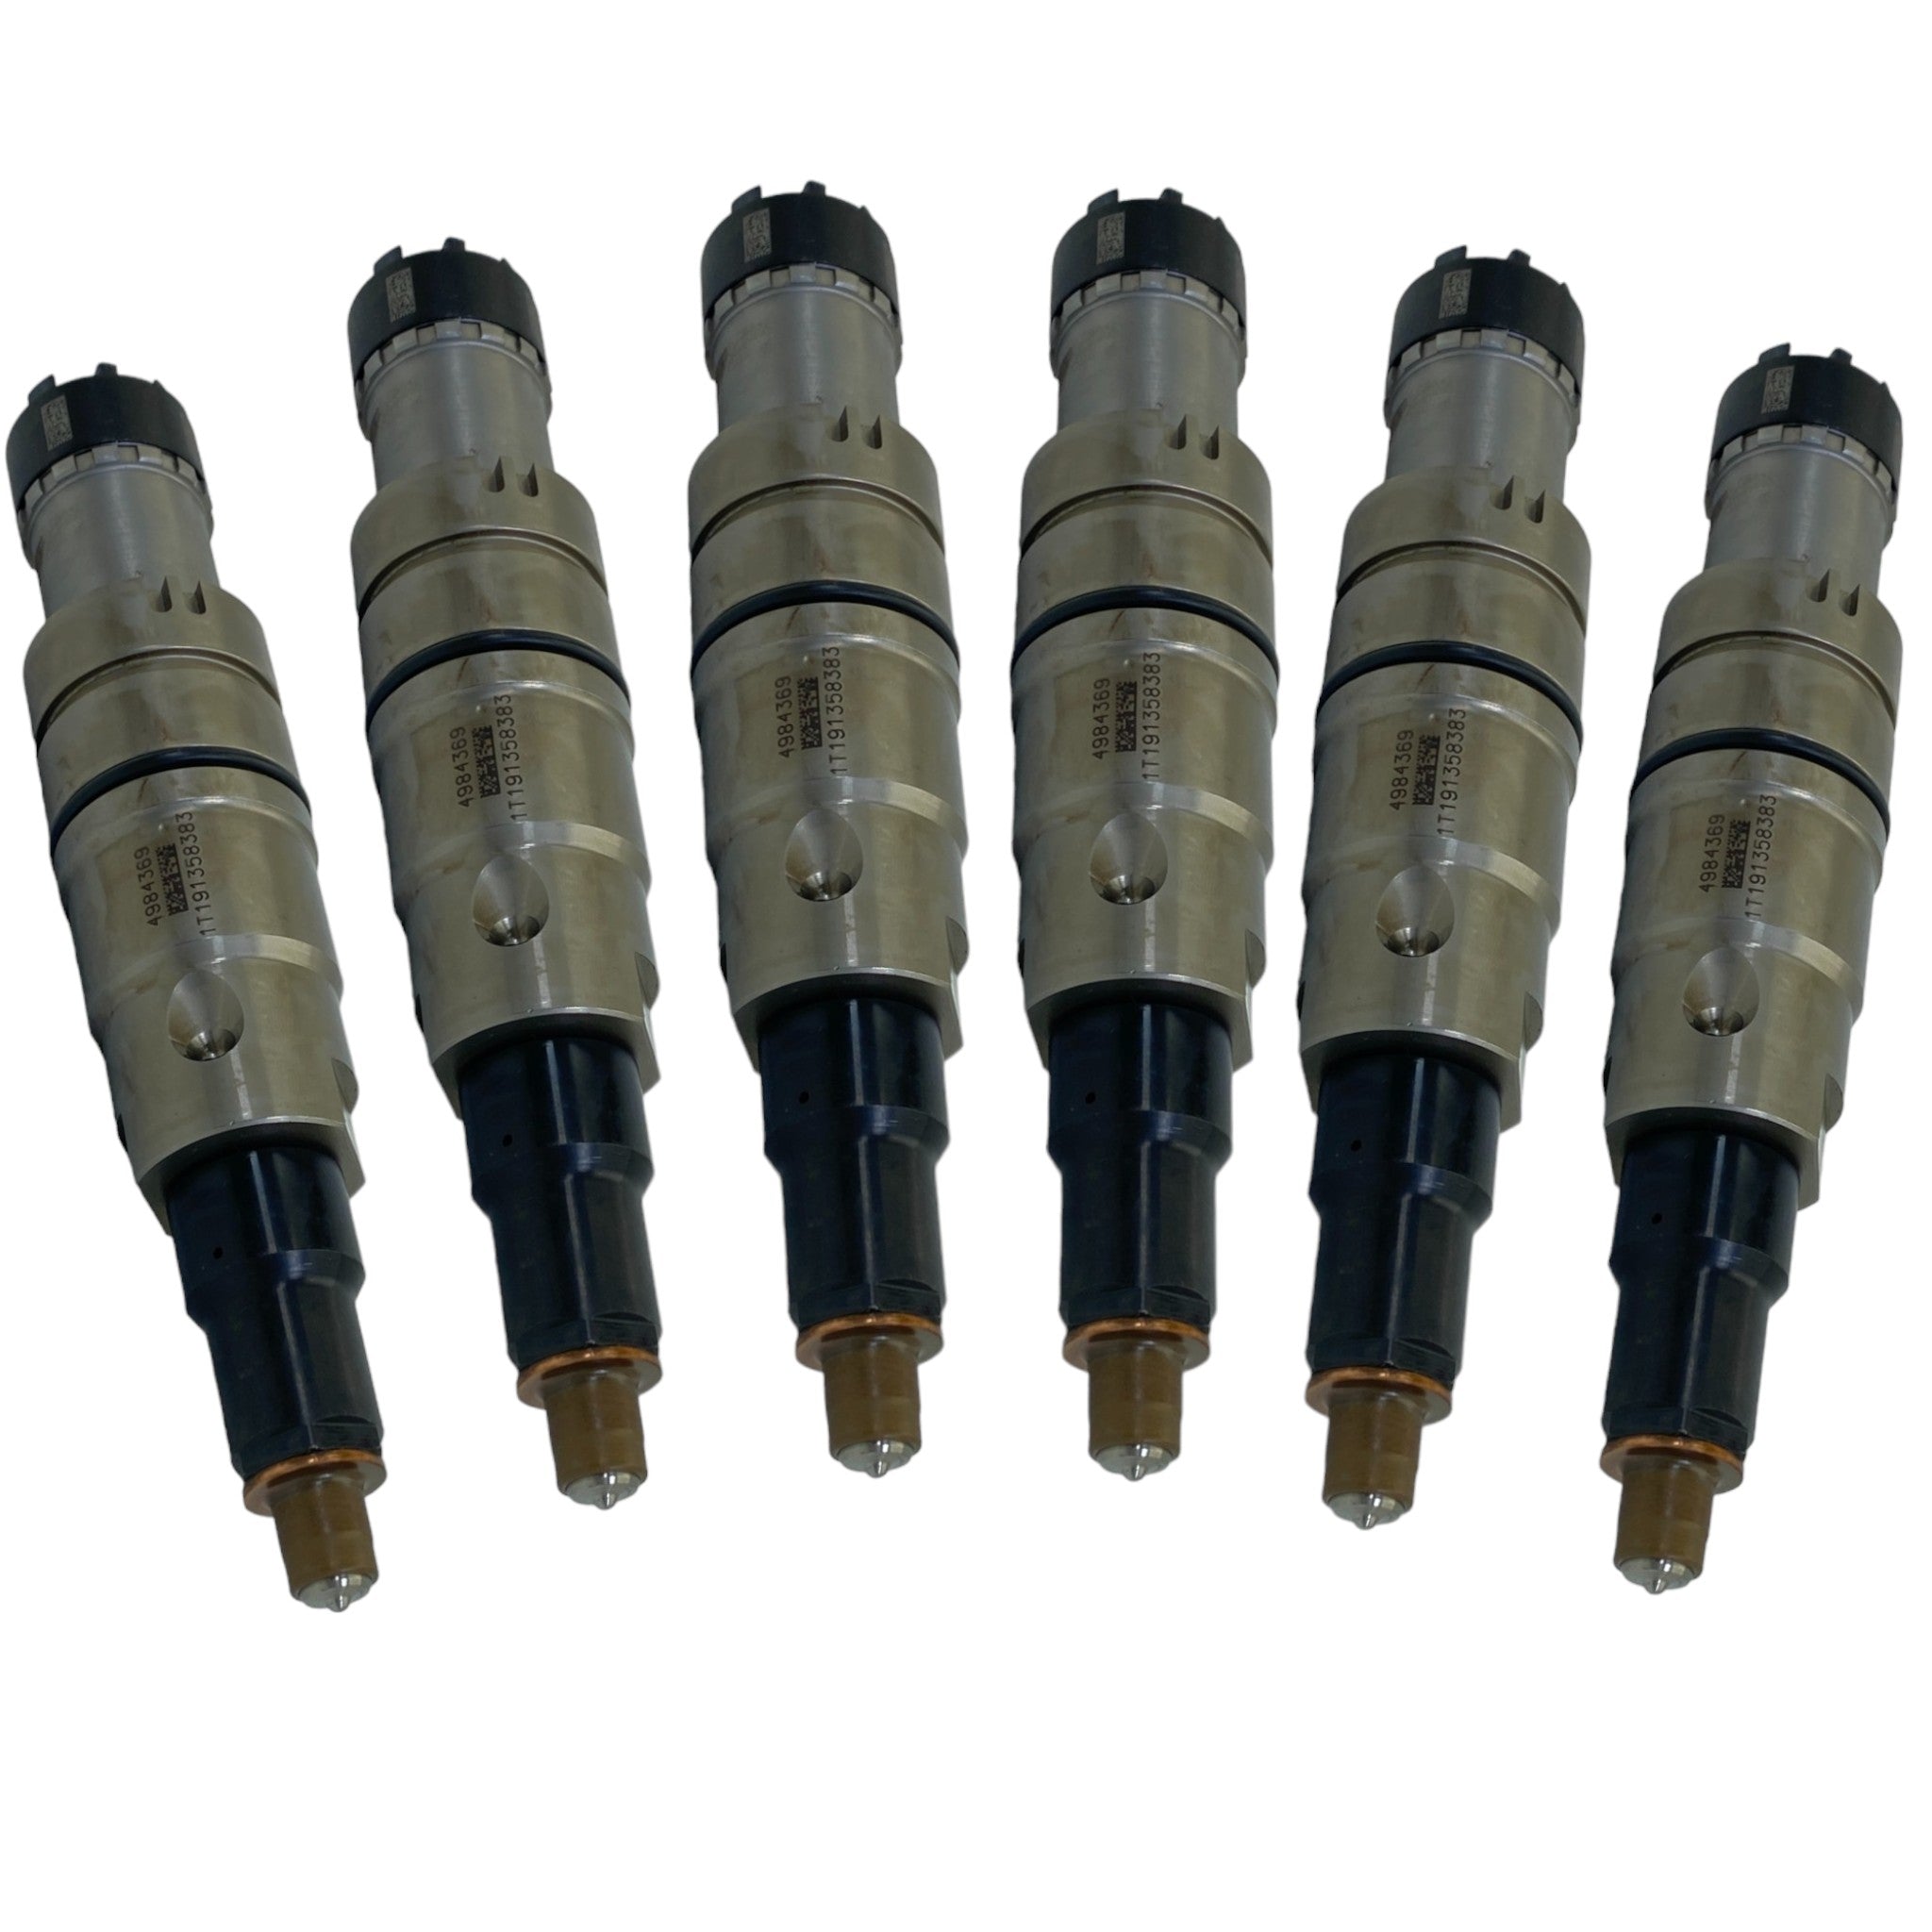 2897320 Genuine Cummins Fuel Injectors Set Of Six For Xpi Fuel Systems On Epa13 15L Isx/Qsx Engines